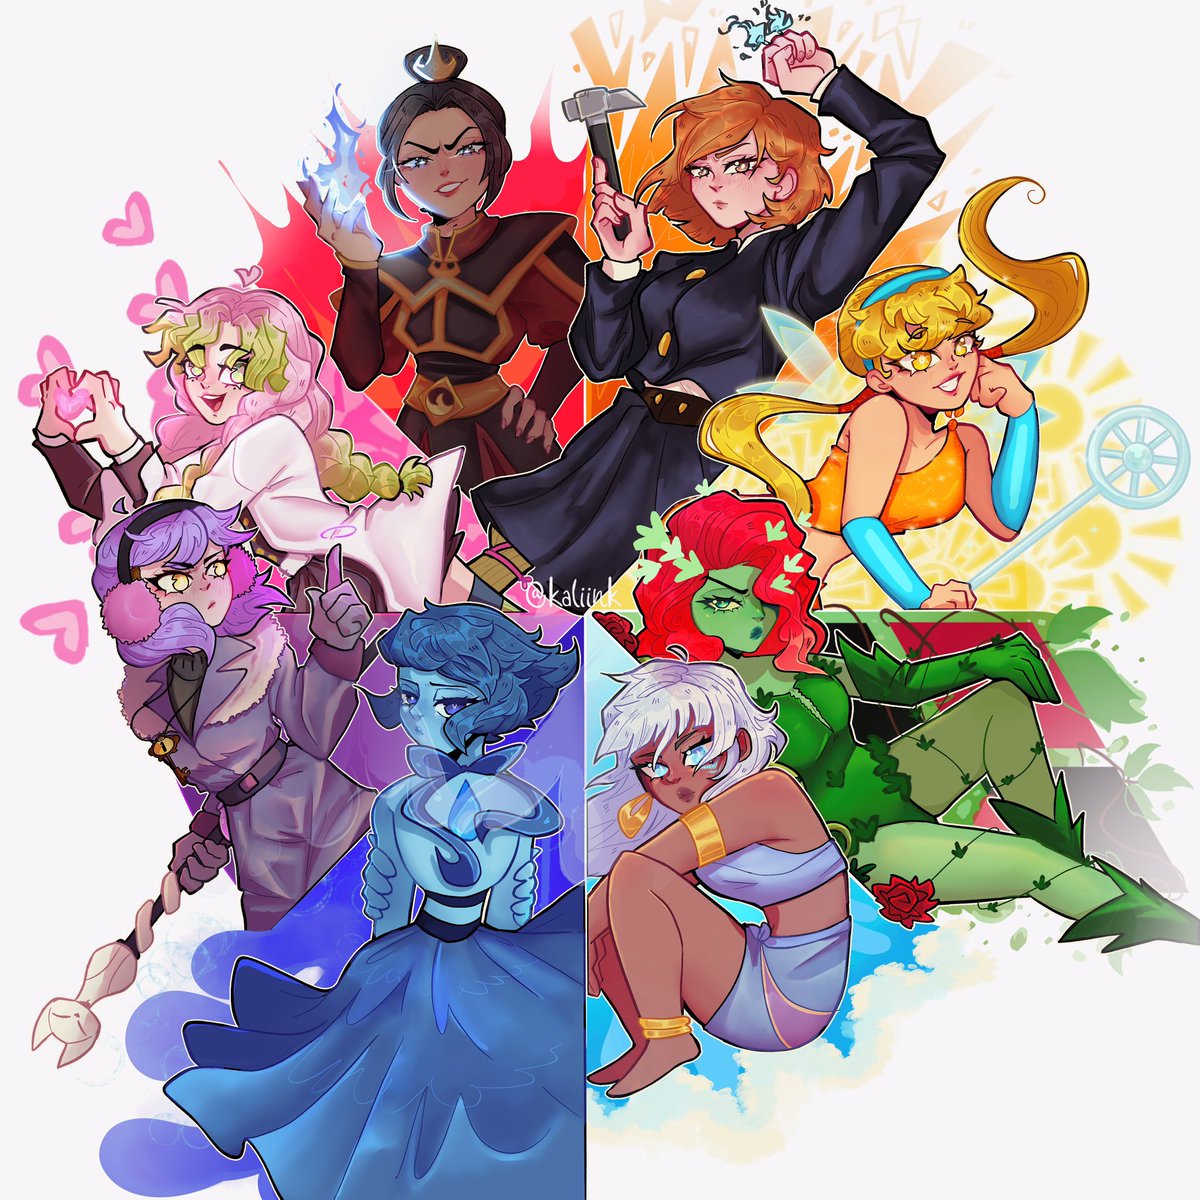 ok since I am gonna be busy and twt hates me I'm gonna post the finished girls the dudes in a bit✌️ #poisonivy #kidaatlantis #StevenUniverse #TheOwlHouse #AmityBlight #demonslayer #mitsuri